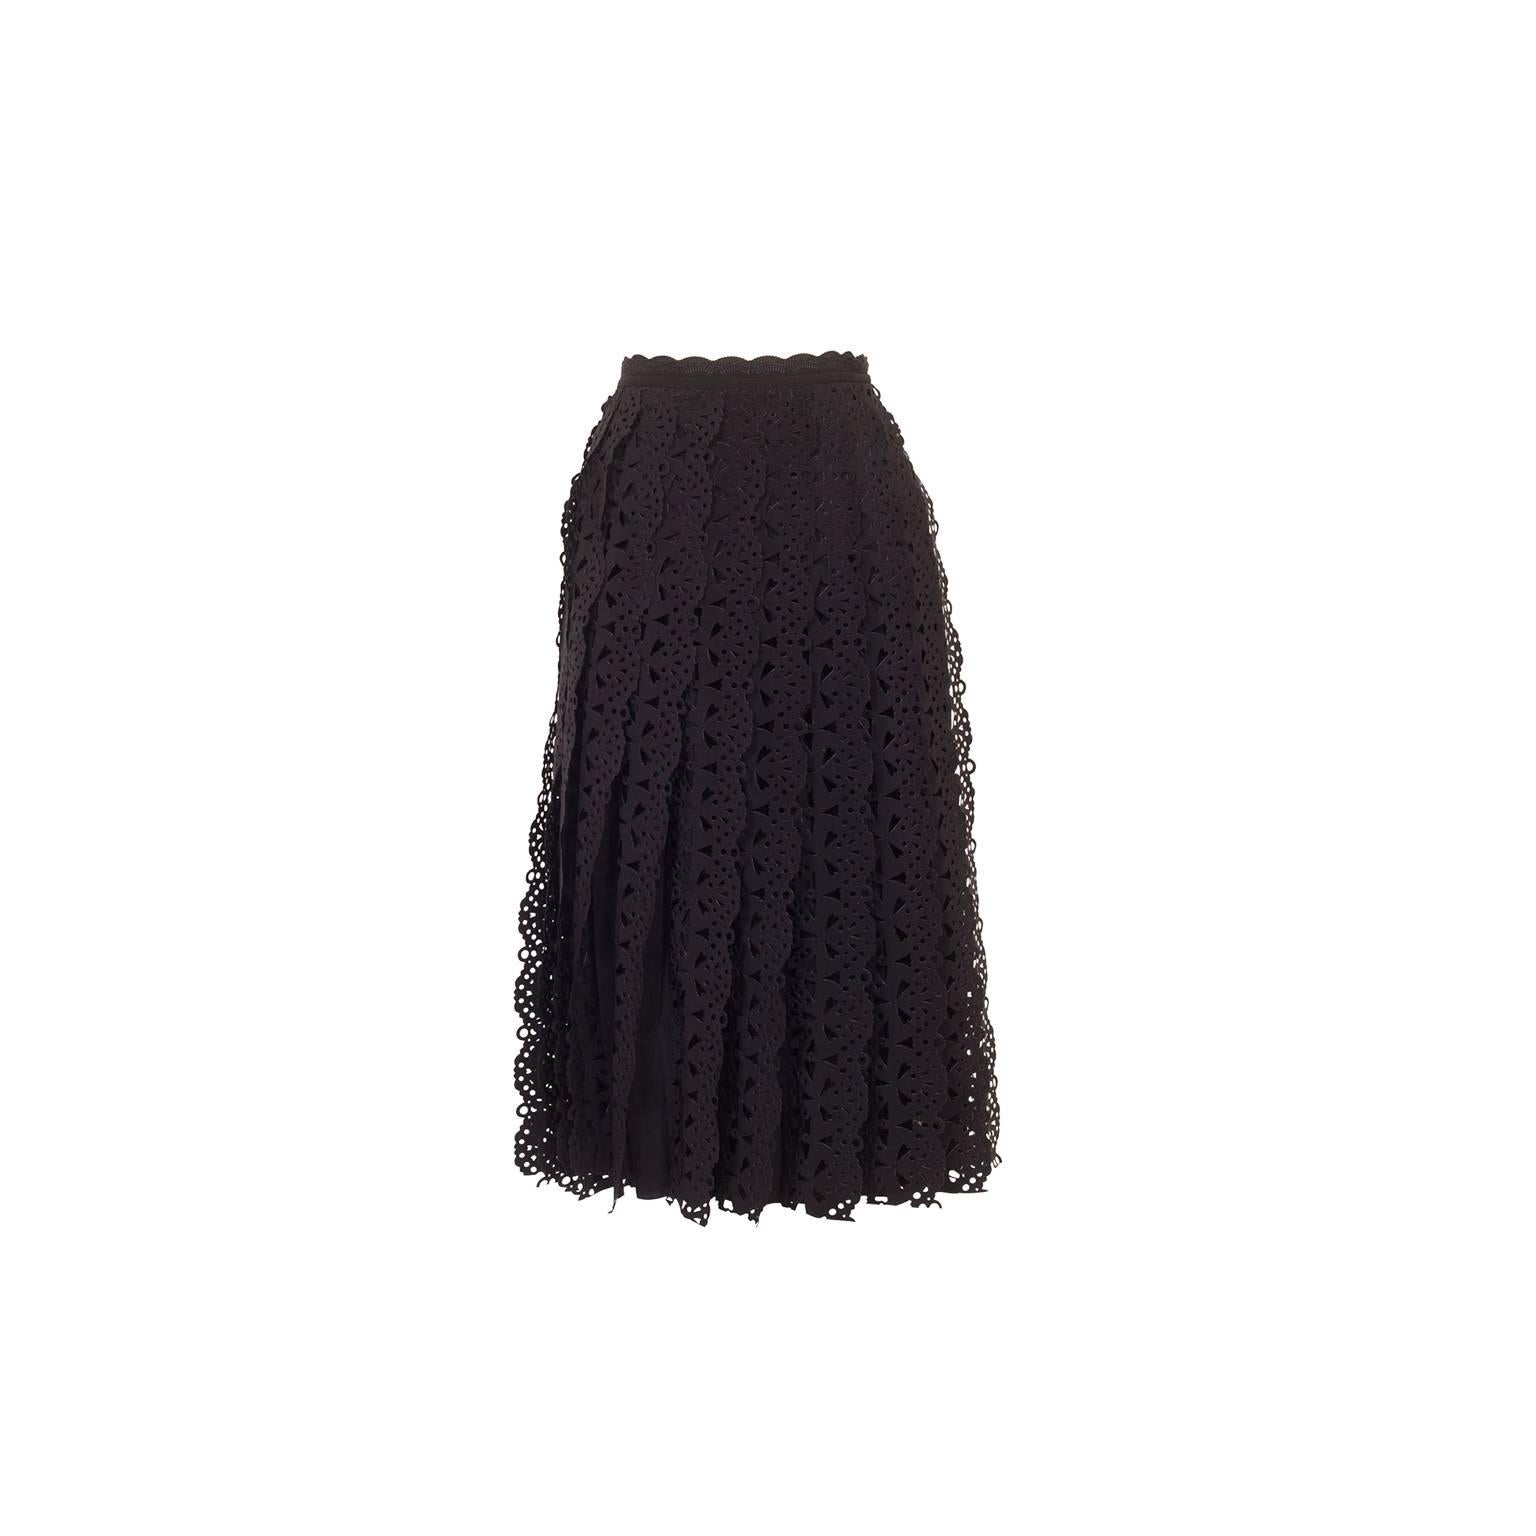 Unique Issey Miyake pleated skirt from 90's. 
Individual cut out lace tape sawn in to each pleats make beautiful movement.

Material : 100% polyester 
Measurements : 
Length 73 cm
Waist 72 cm 
